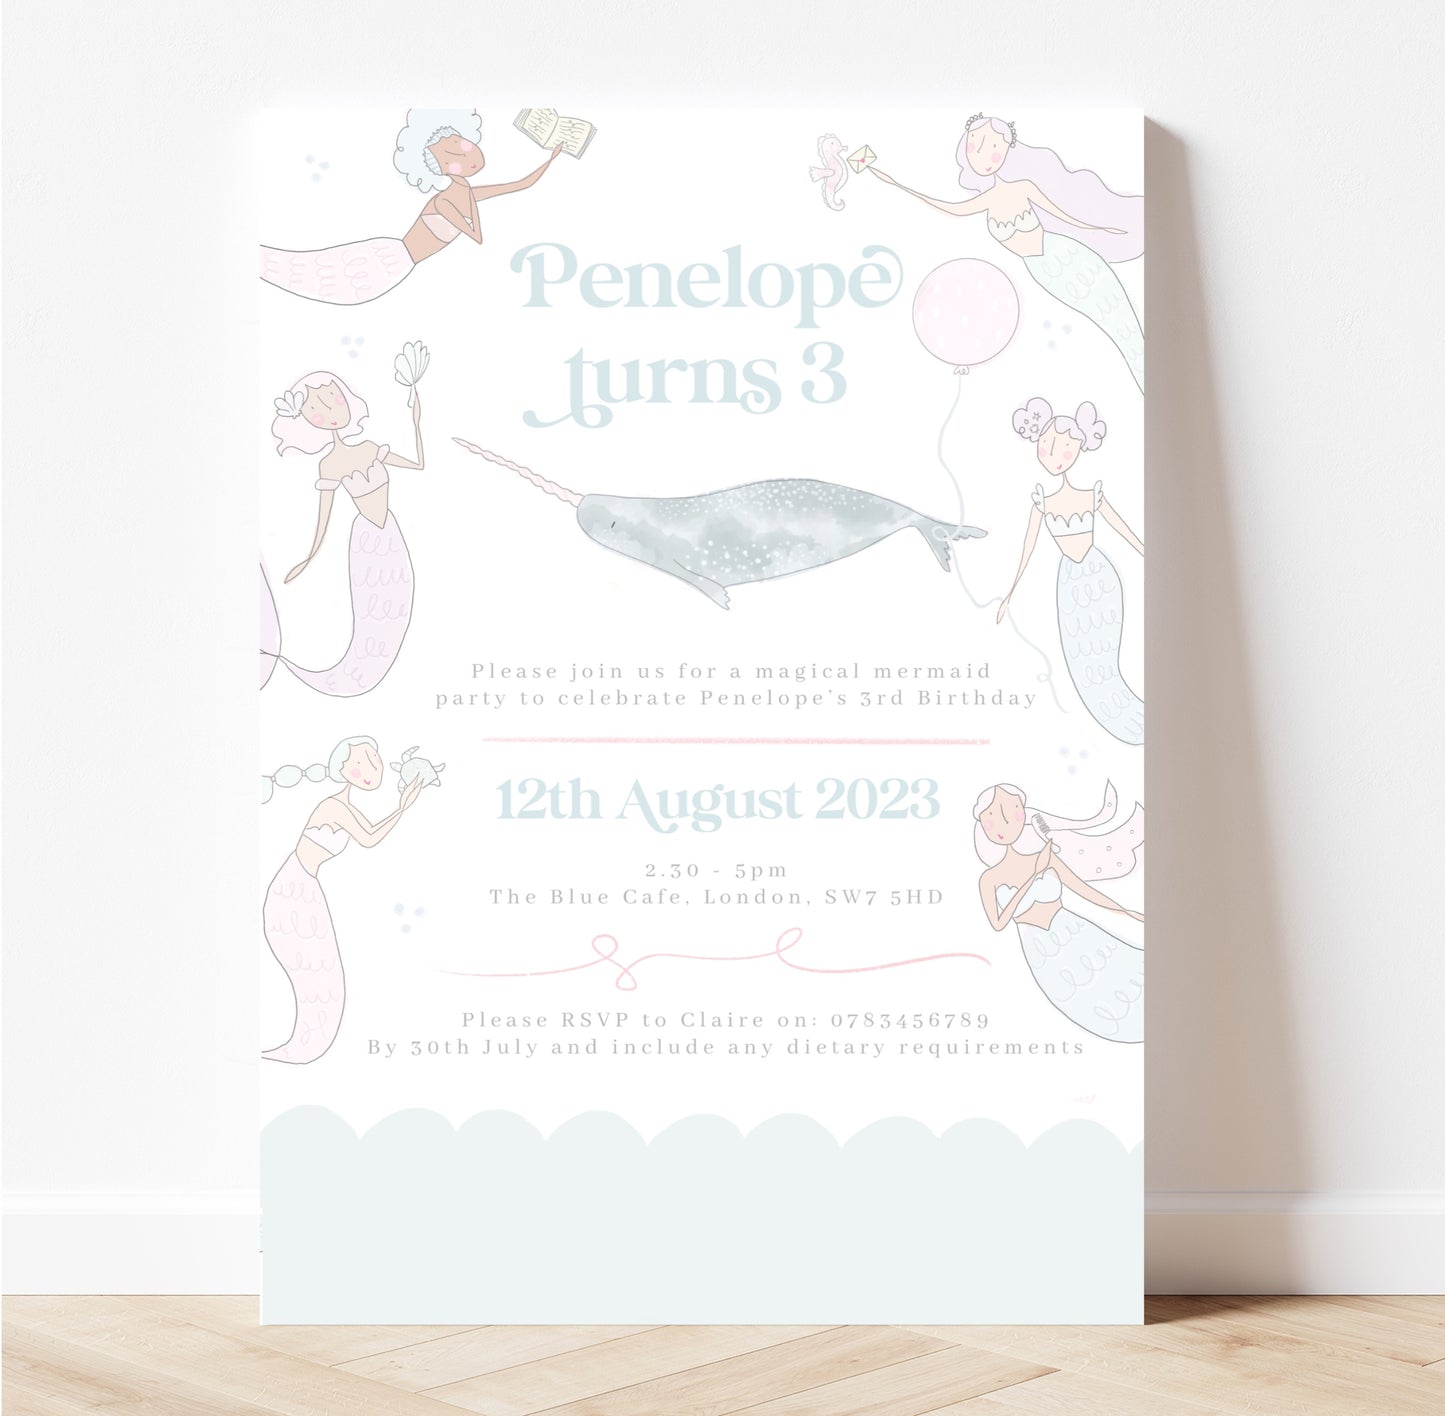 Personalised magical mermaid invitations with gold foil